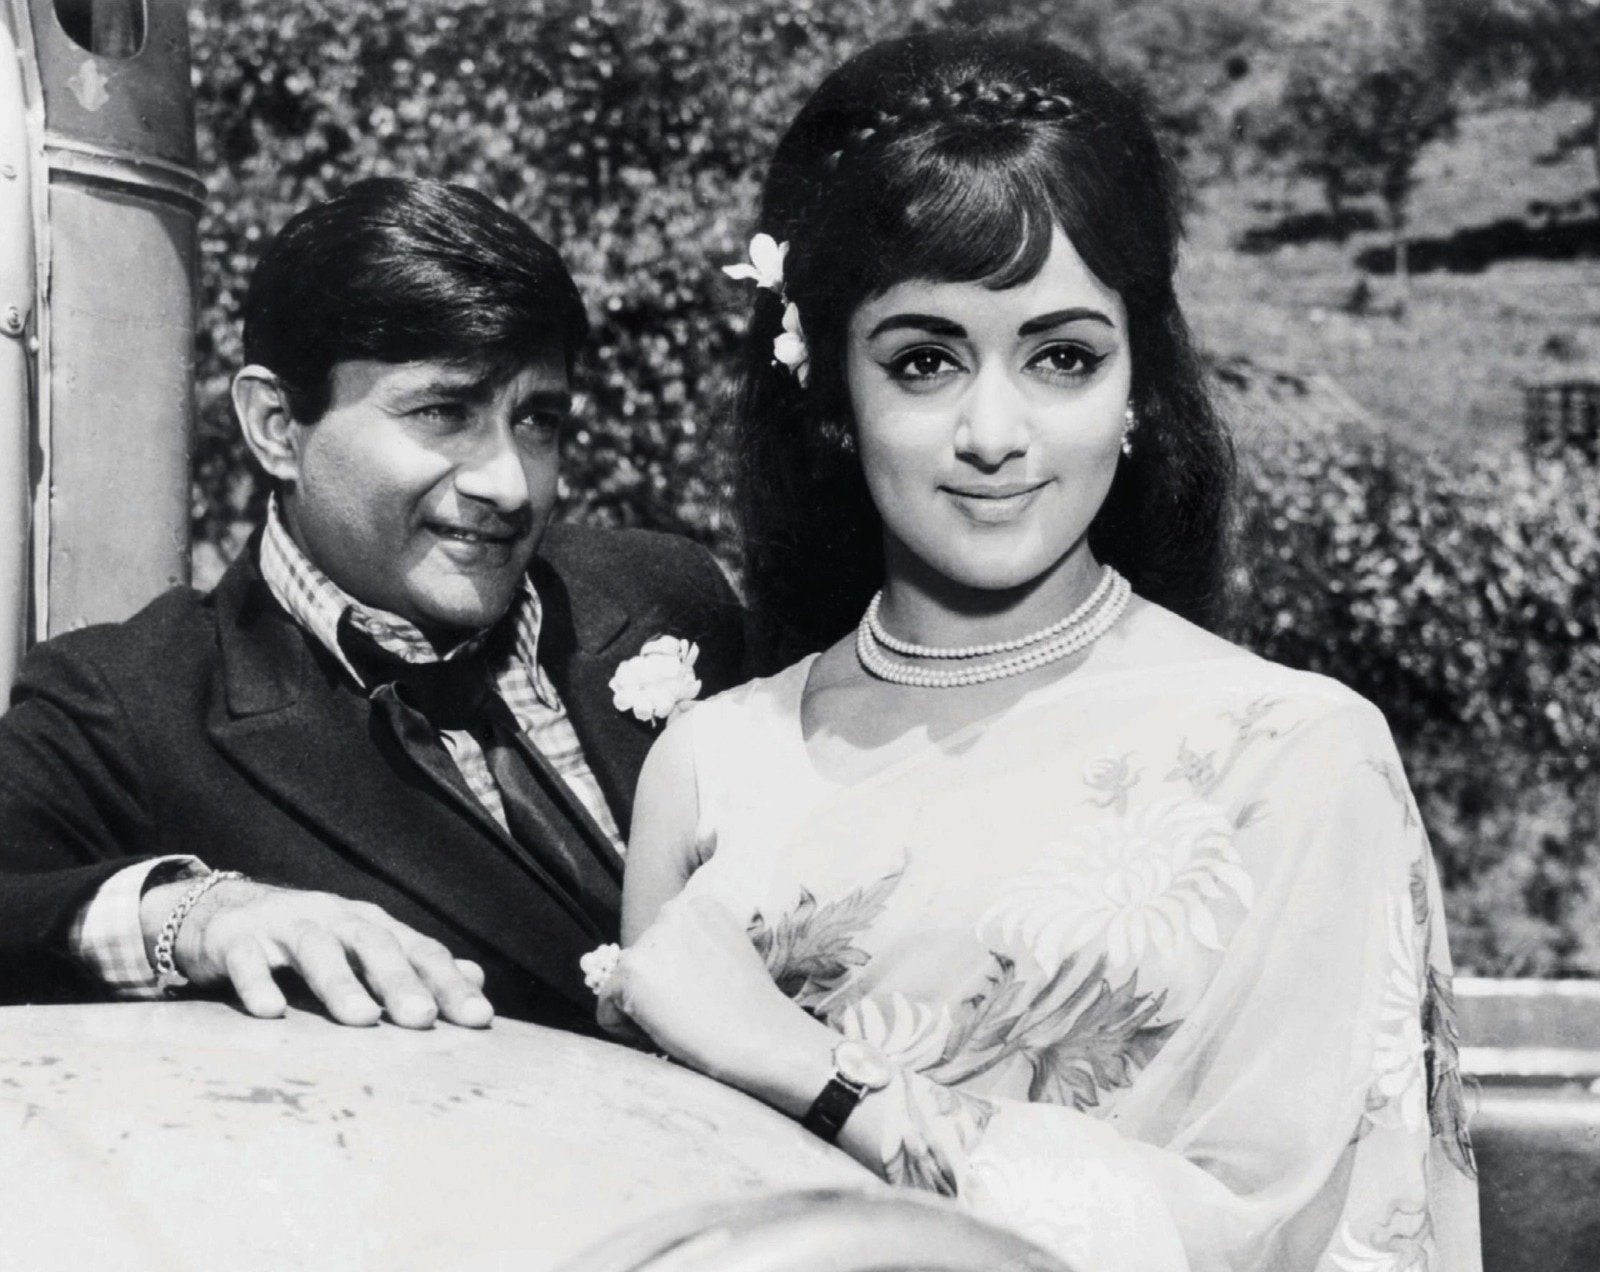 Hema Malini was sweating while doing this scene with Dev Anand! The Dream Girl was in such a state due to shame